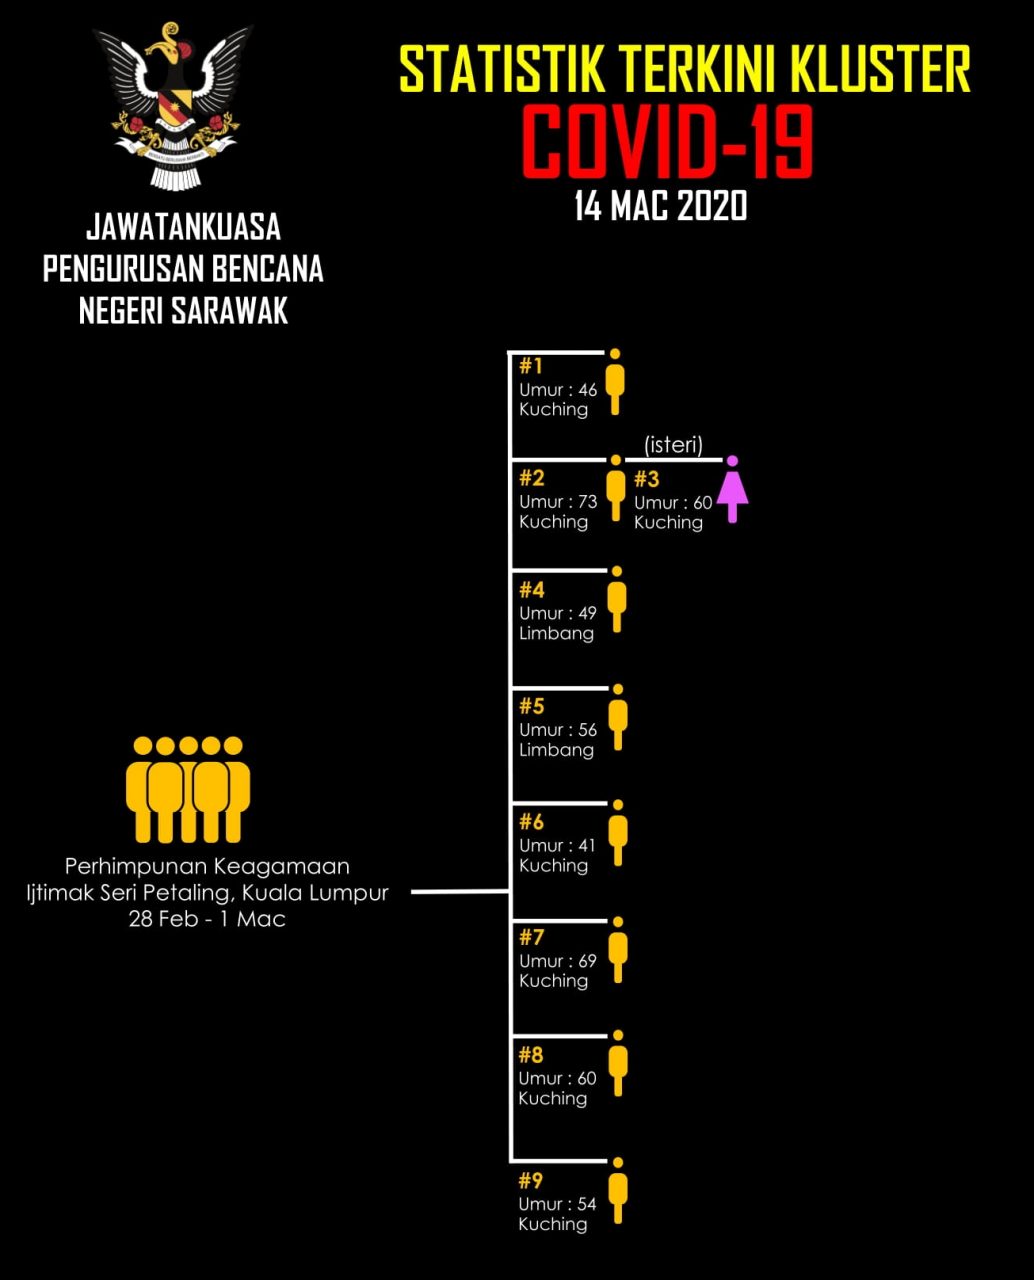 6 new Covid19 cases detected in Sarawak, bringing total to 9